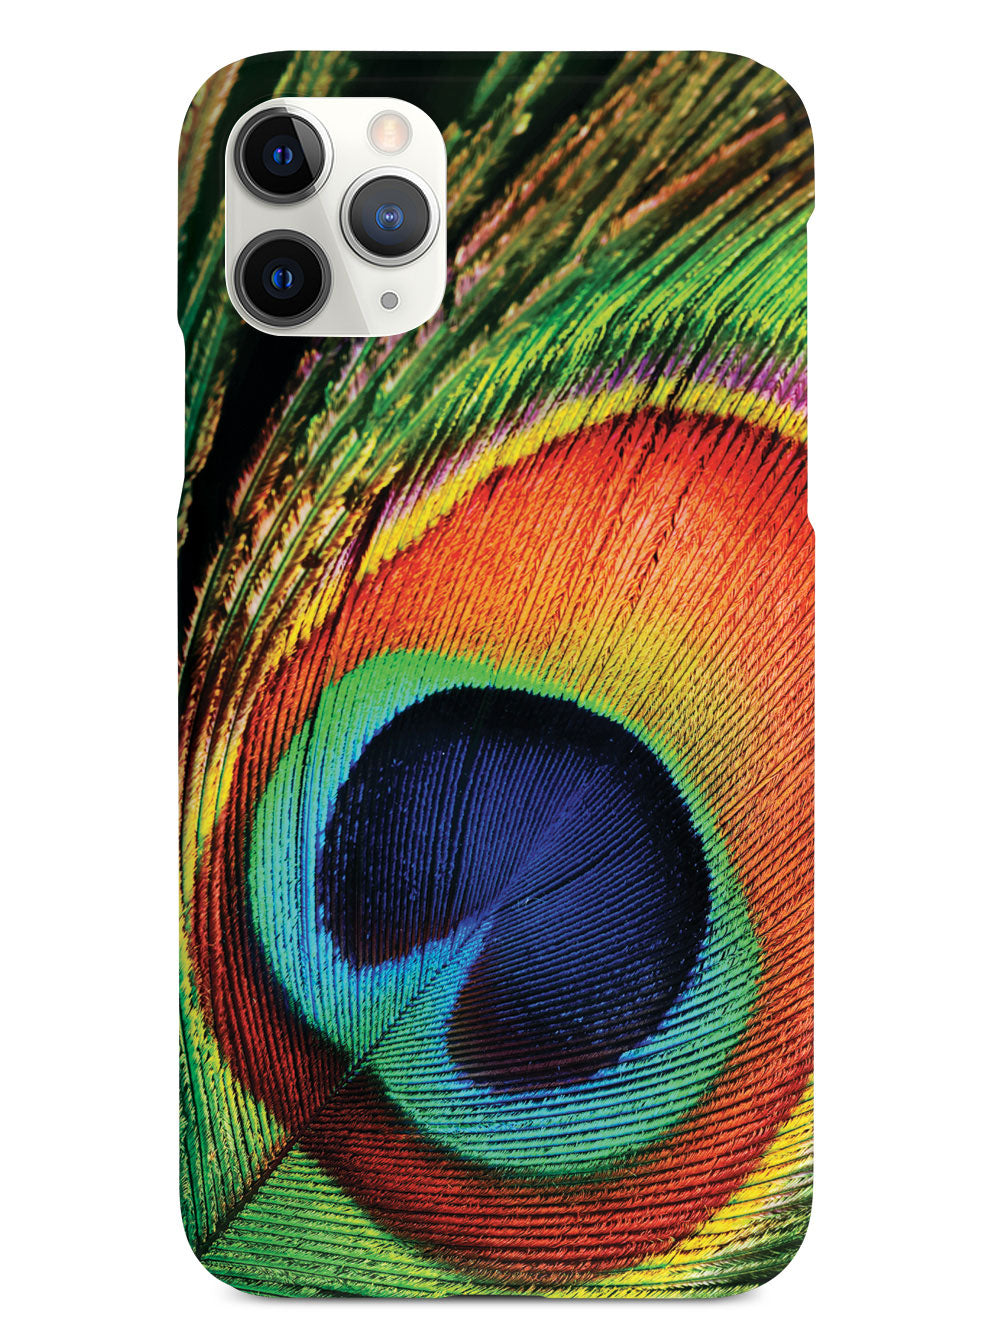 Textured Peacock Feather Case